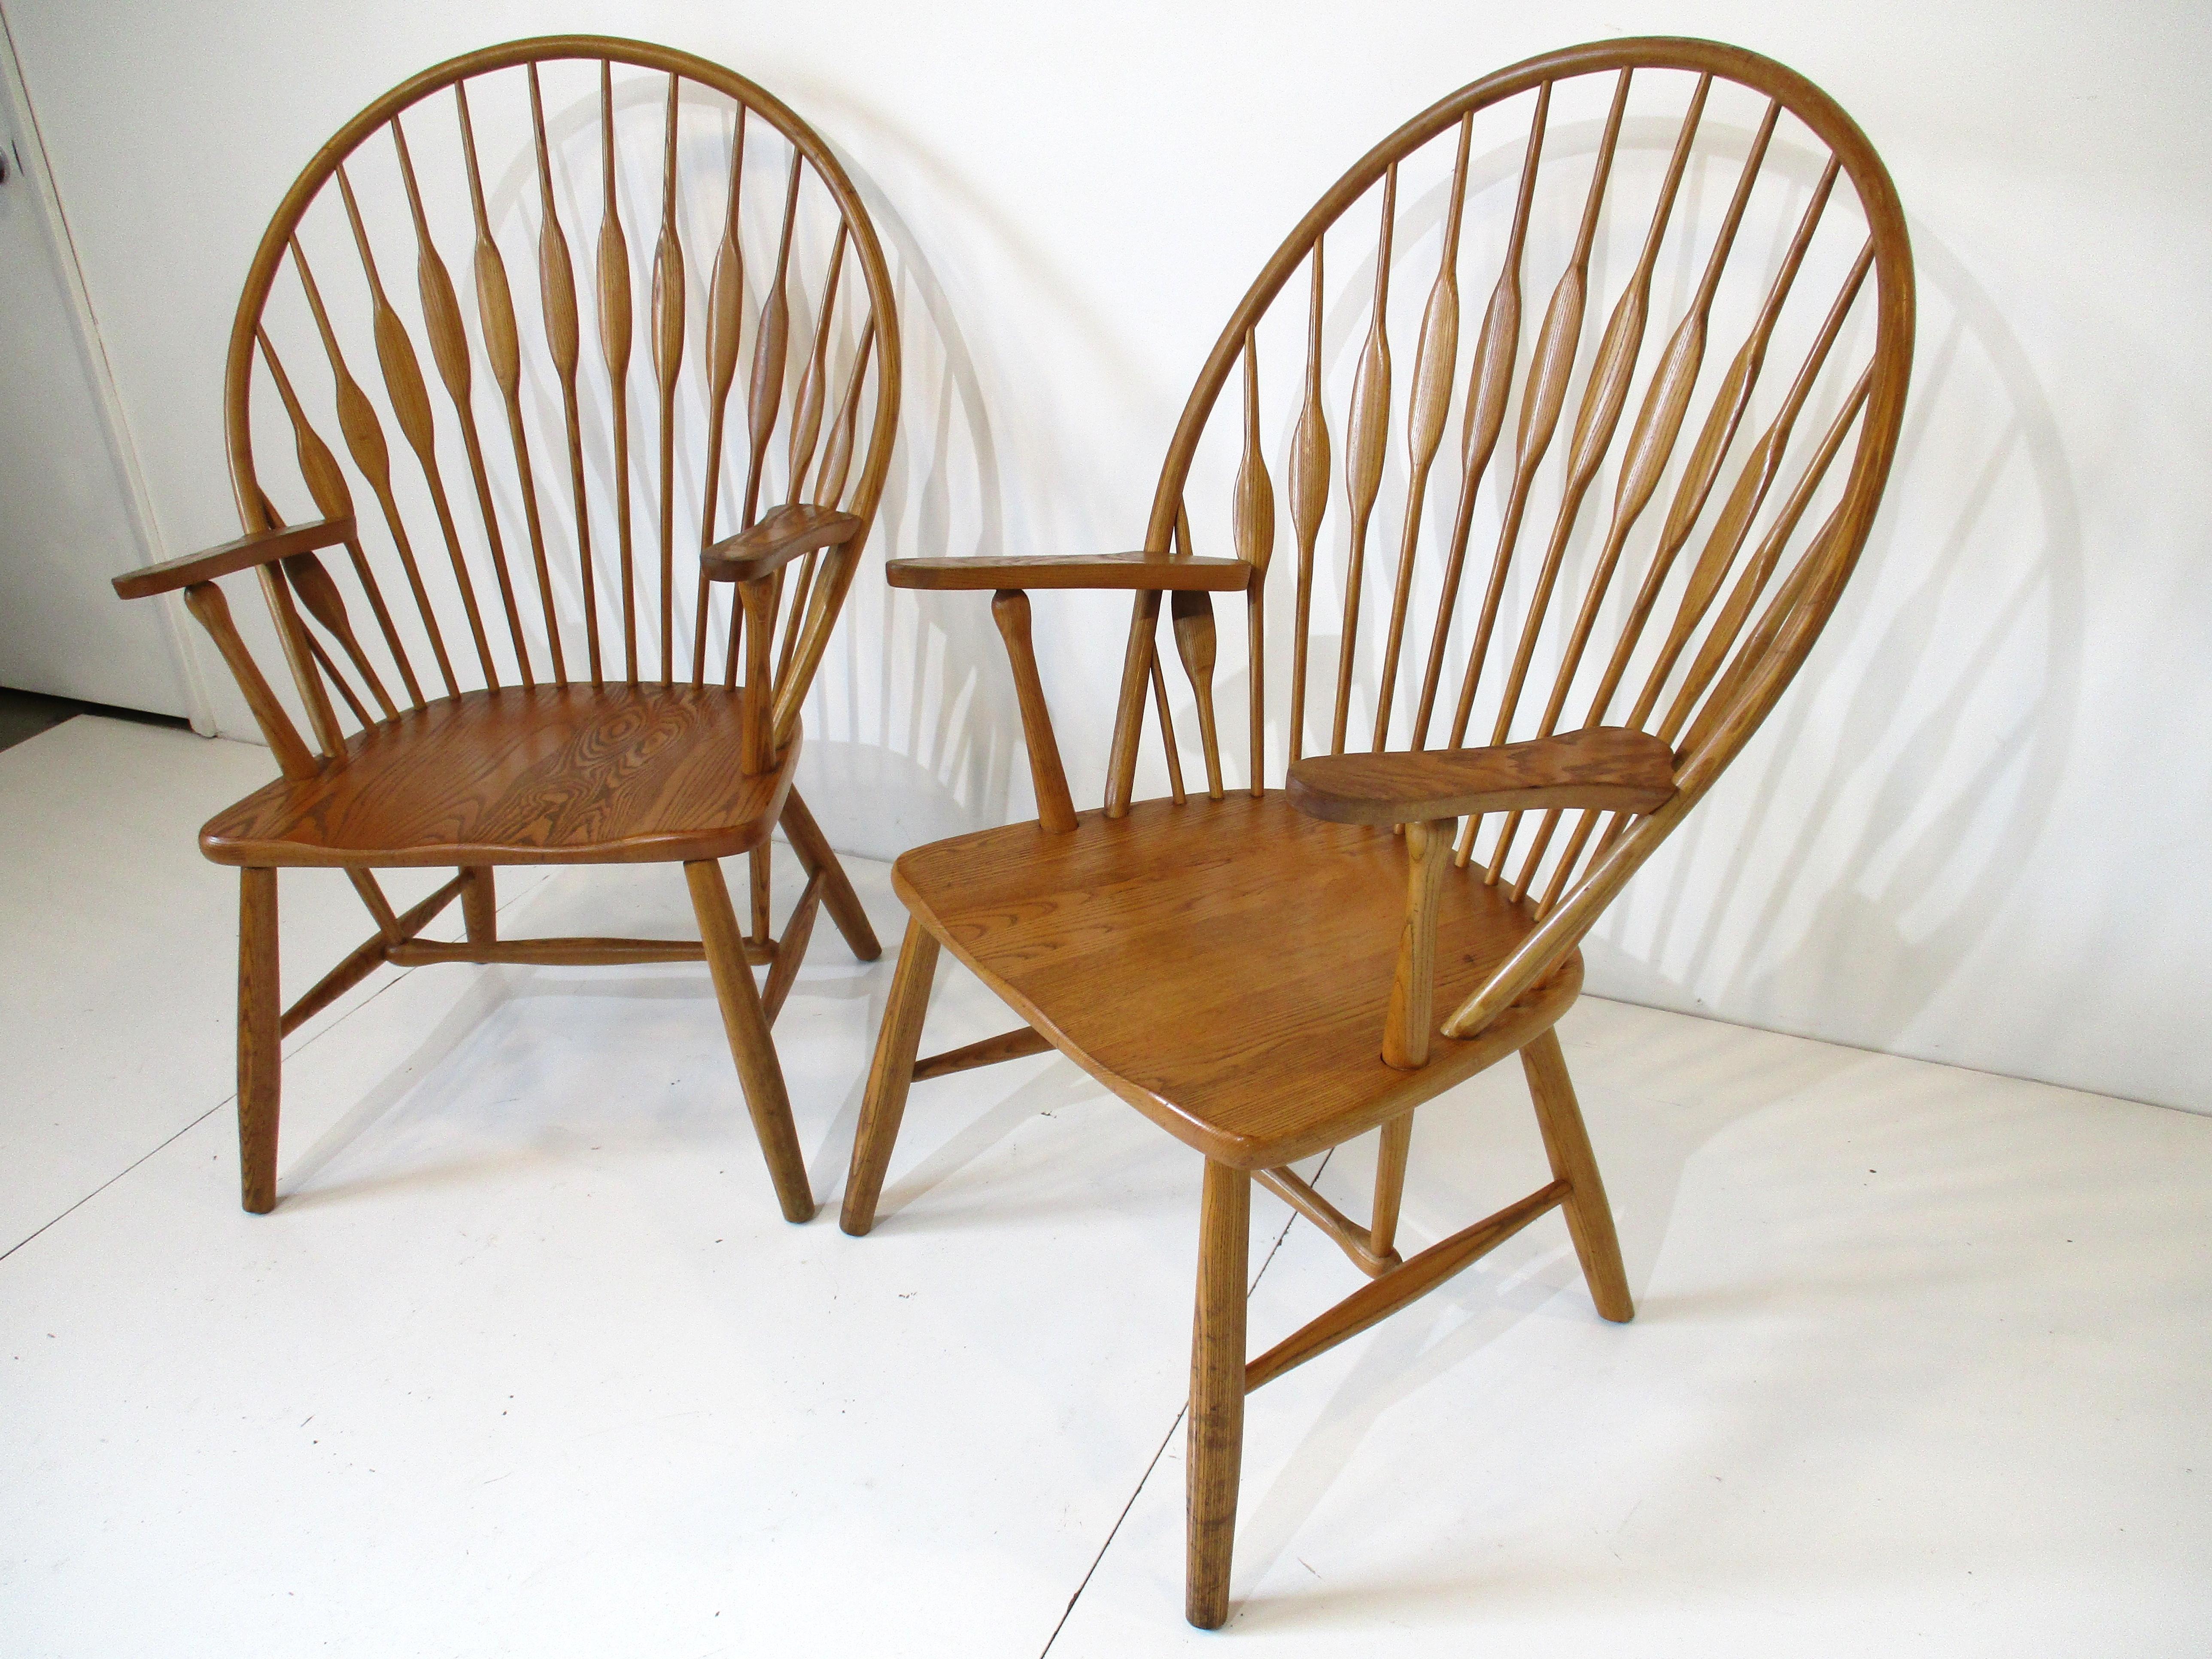 A pair of handcrafted wooden Peacock chairs with curved back, sculptural spindles and legs with arms. Designed in the manner of Danish modernist Hans J. Wegner and his model JH 550 chairs. The chairs are super comfortable and will fit with many